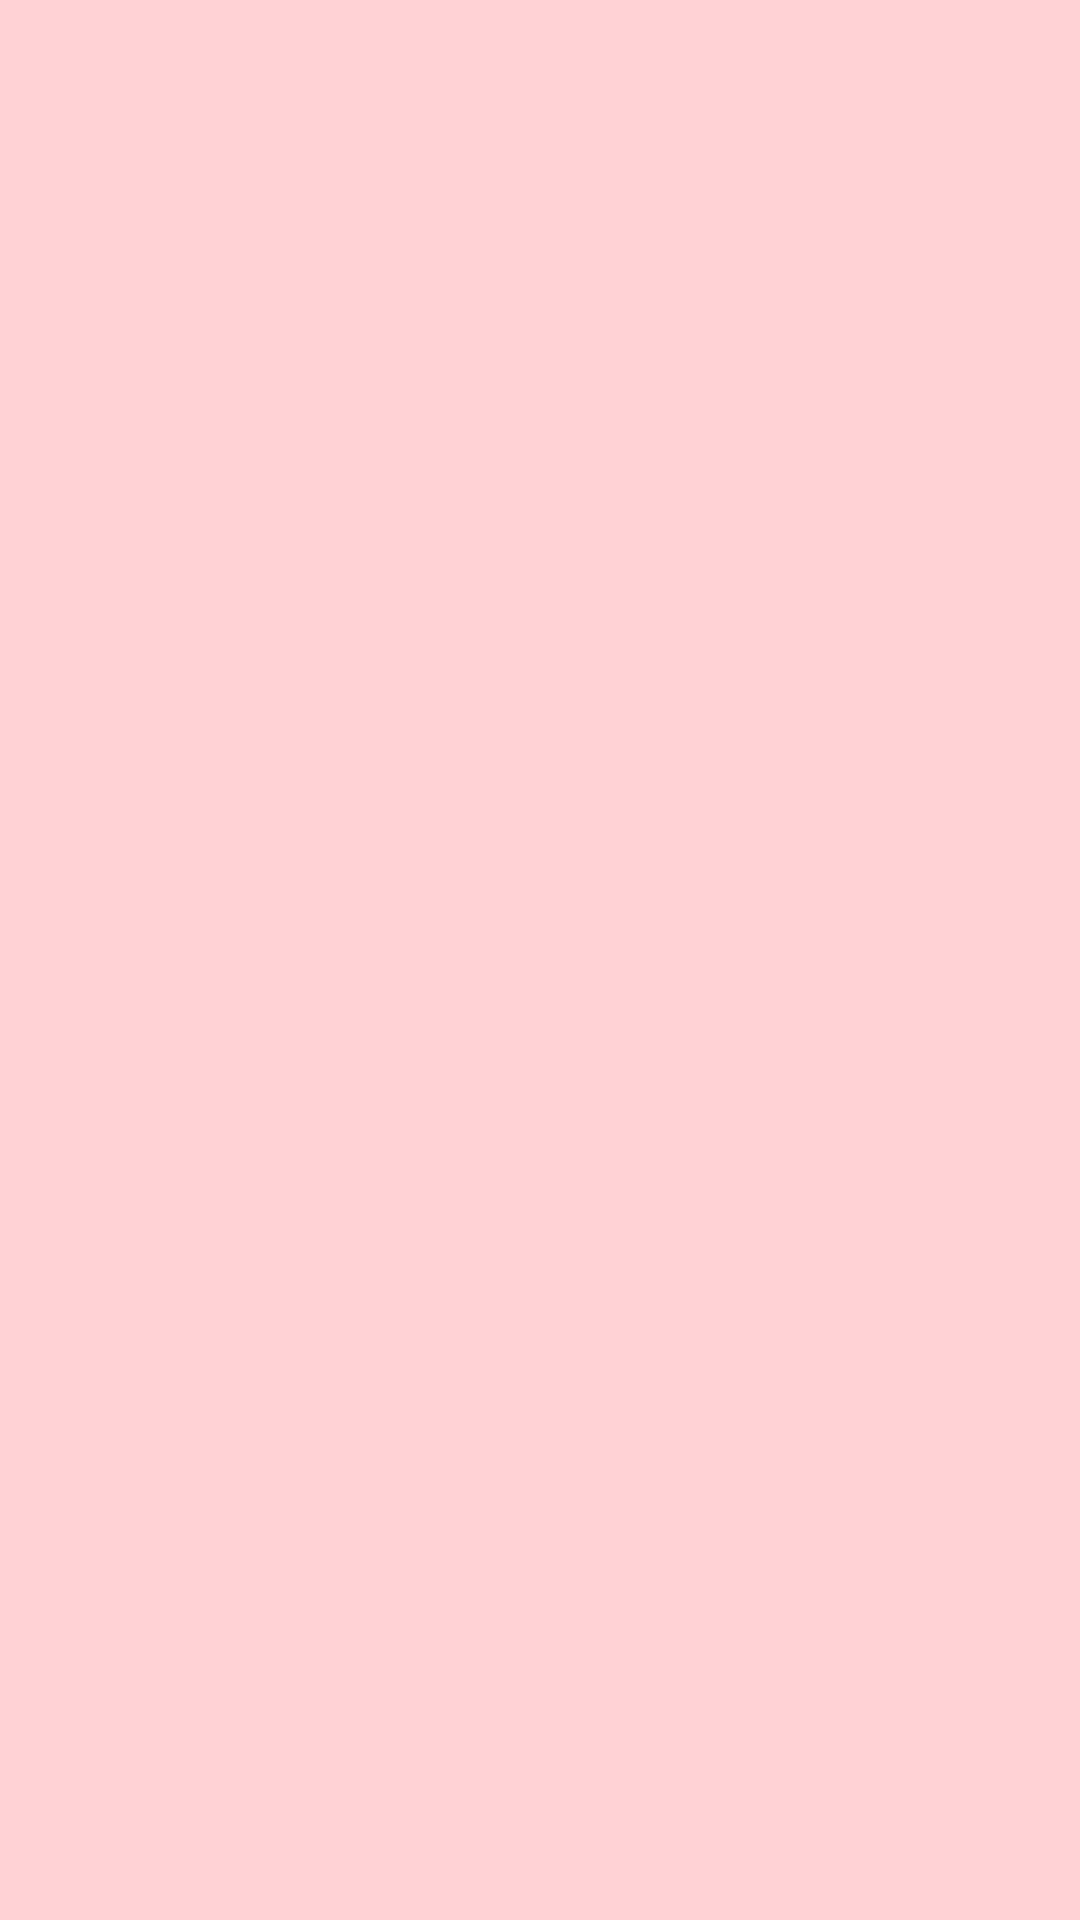 A Calm and Soft Light Pink Background